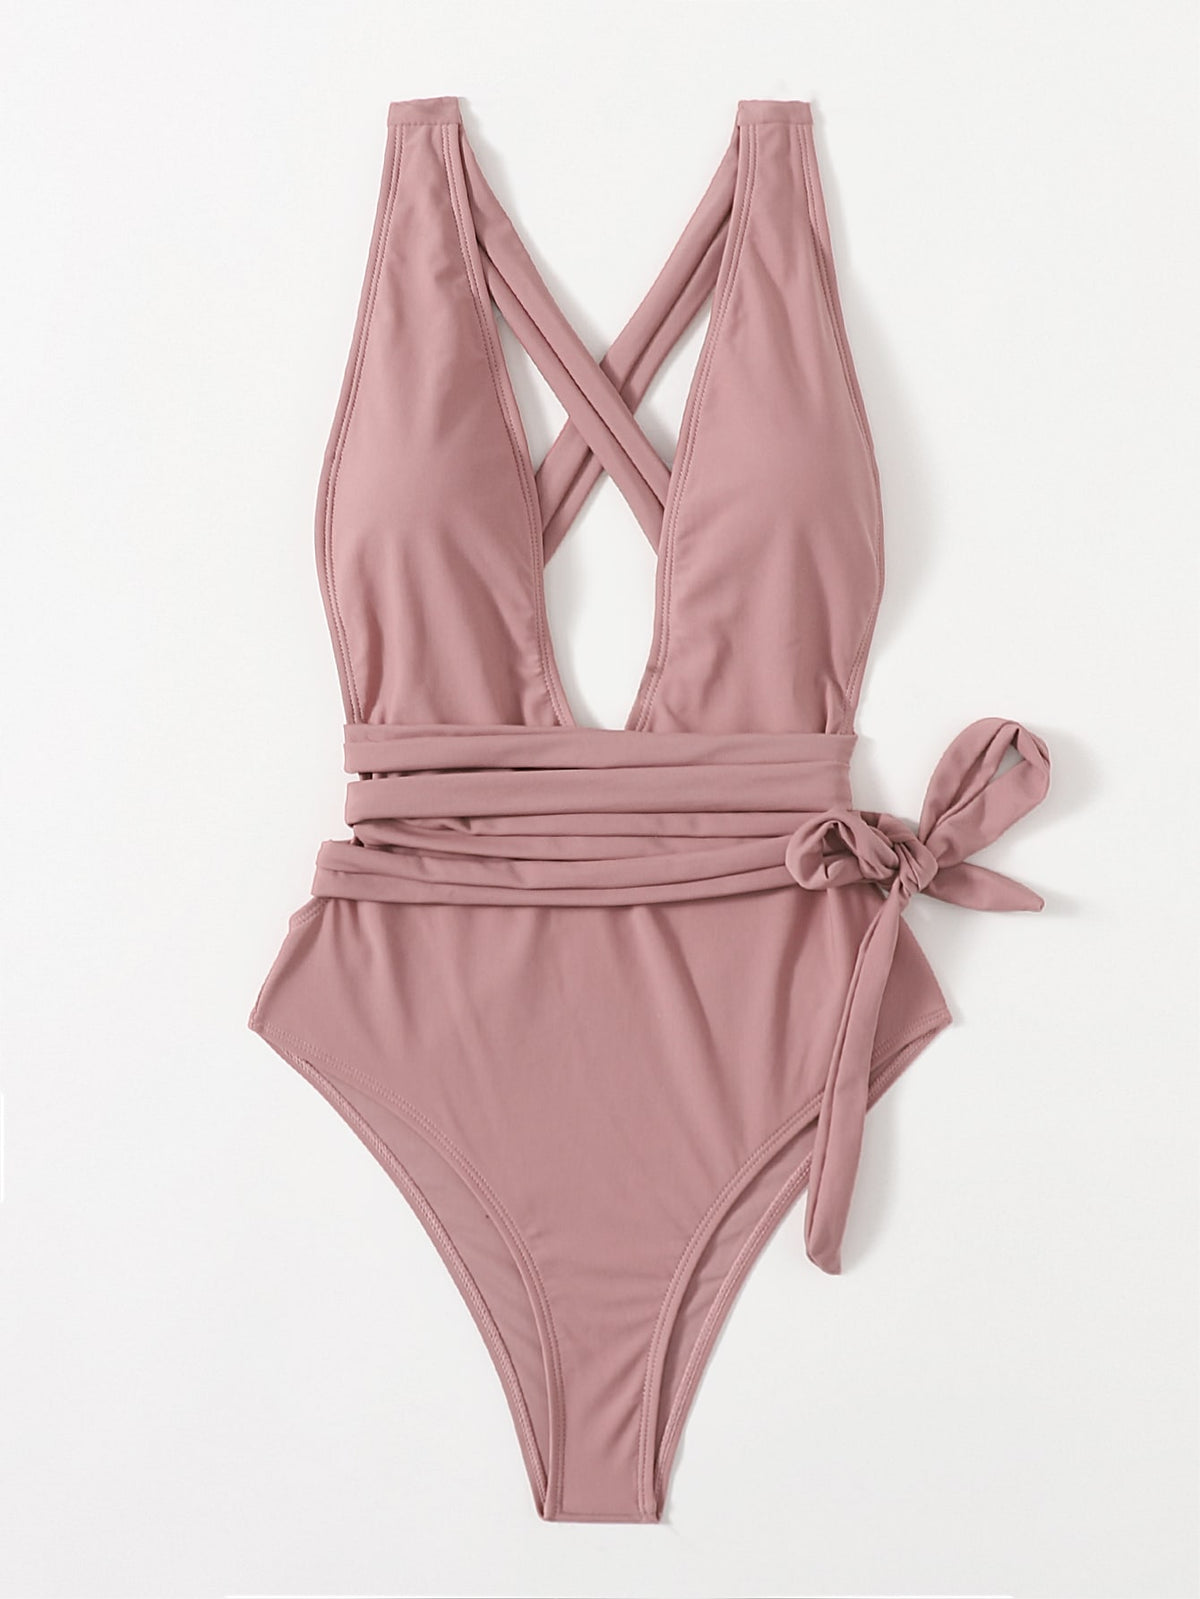 White Plunging Neck One Piece Swimsuit - Dusty Pink / L